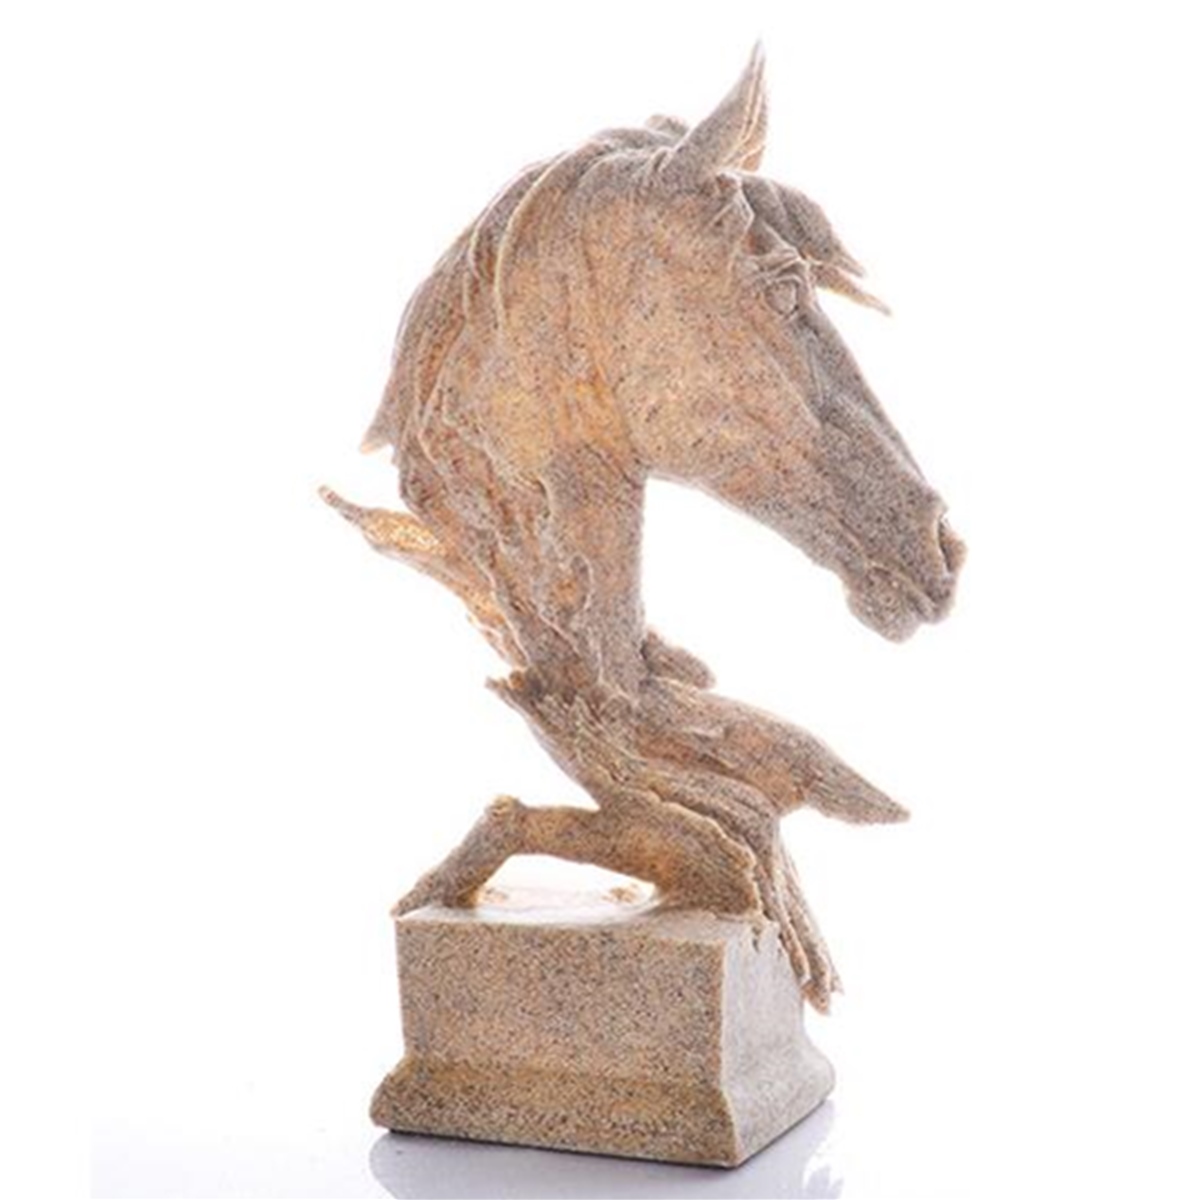 Vintage-Statue-Horse-Head-Bust-Ornament-Sculpture-Figurine-Home-Feature-Display-Decorations-1639659-5